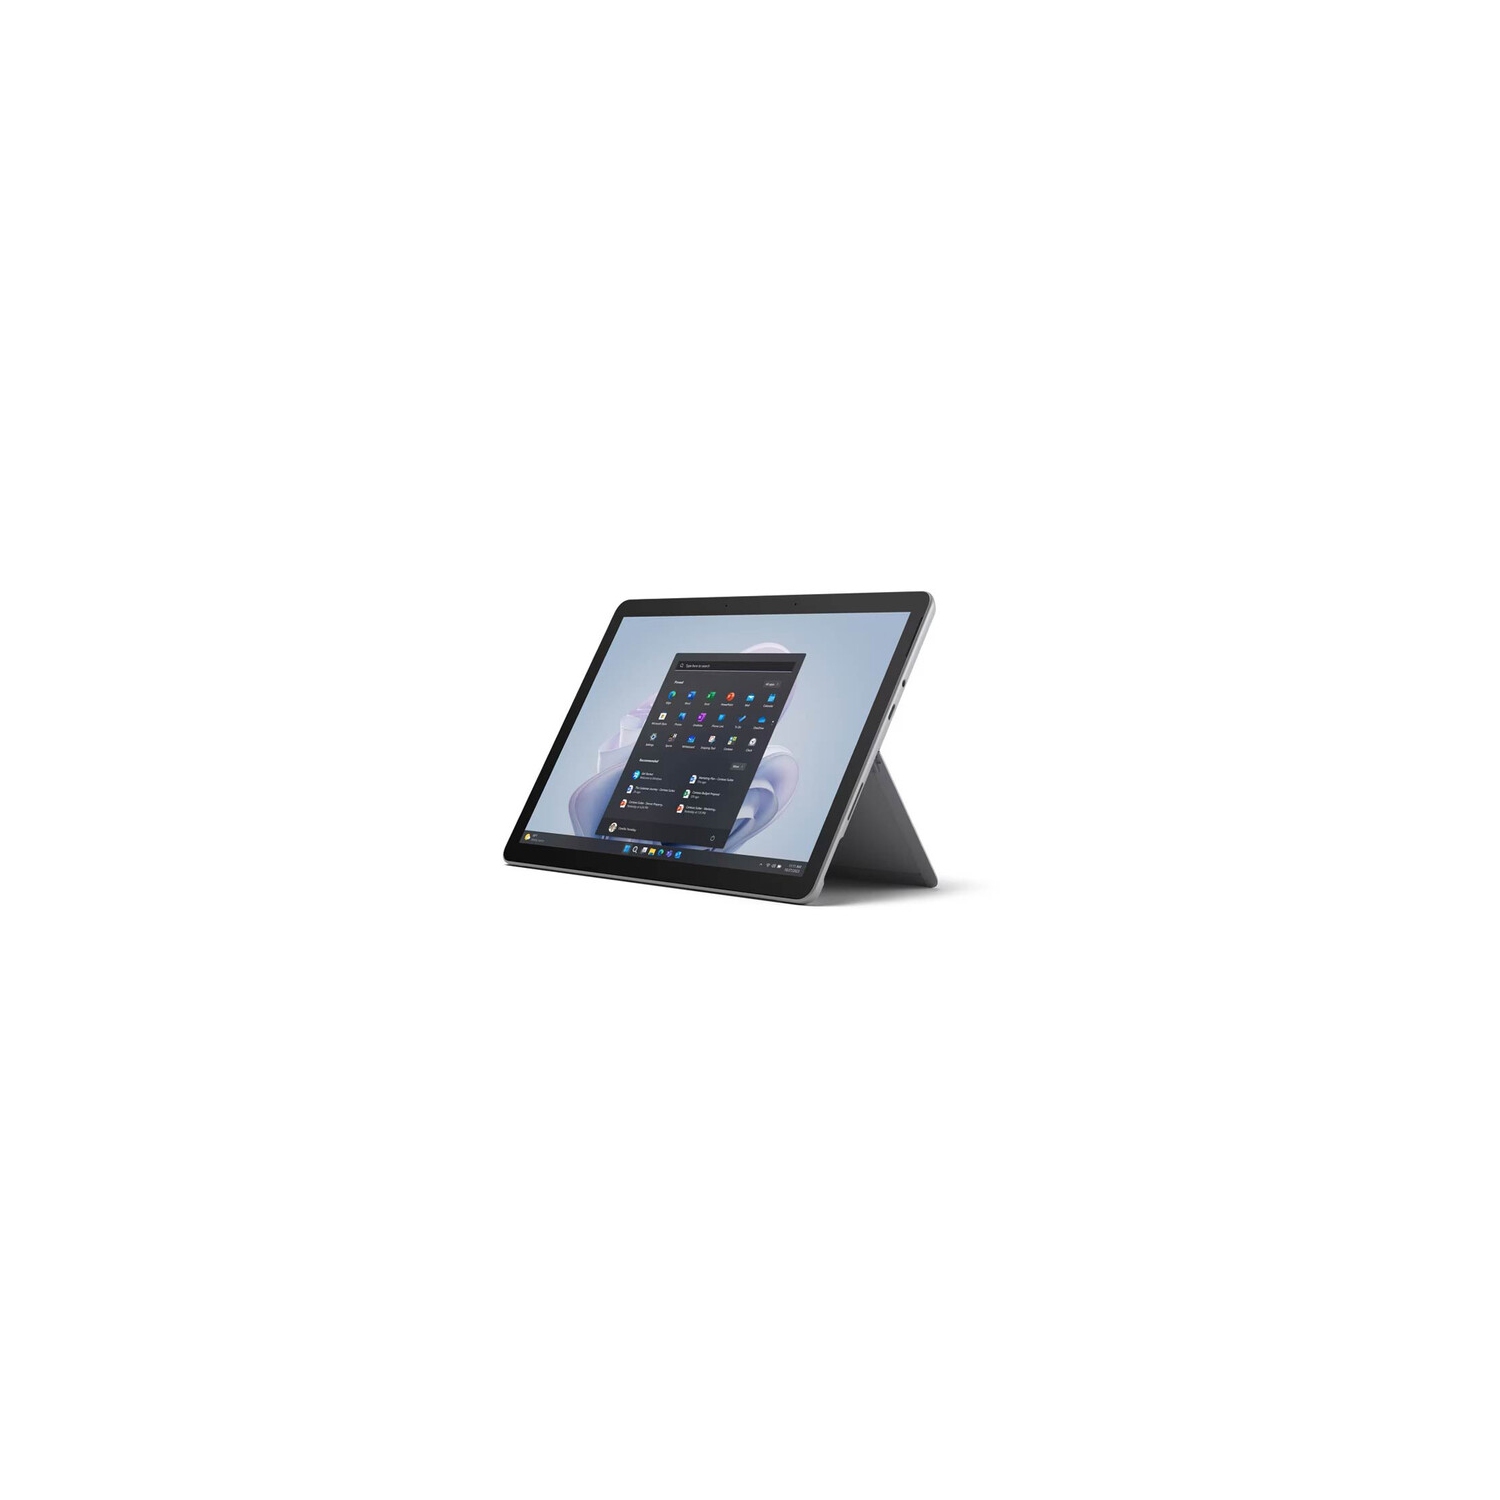 Microsoft Surface Commercial Go 4 10.5" 64 GB Windows 11 Tablet With Intel processor N200 Quad-core Processor (XGT-00001)